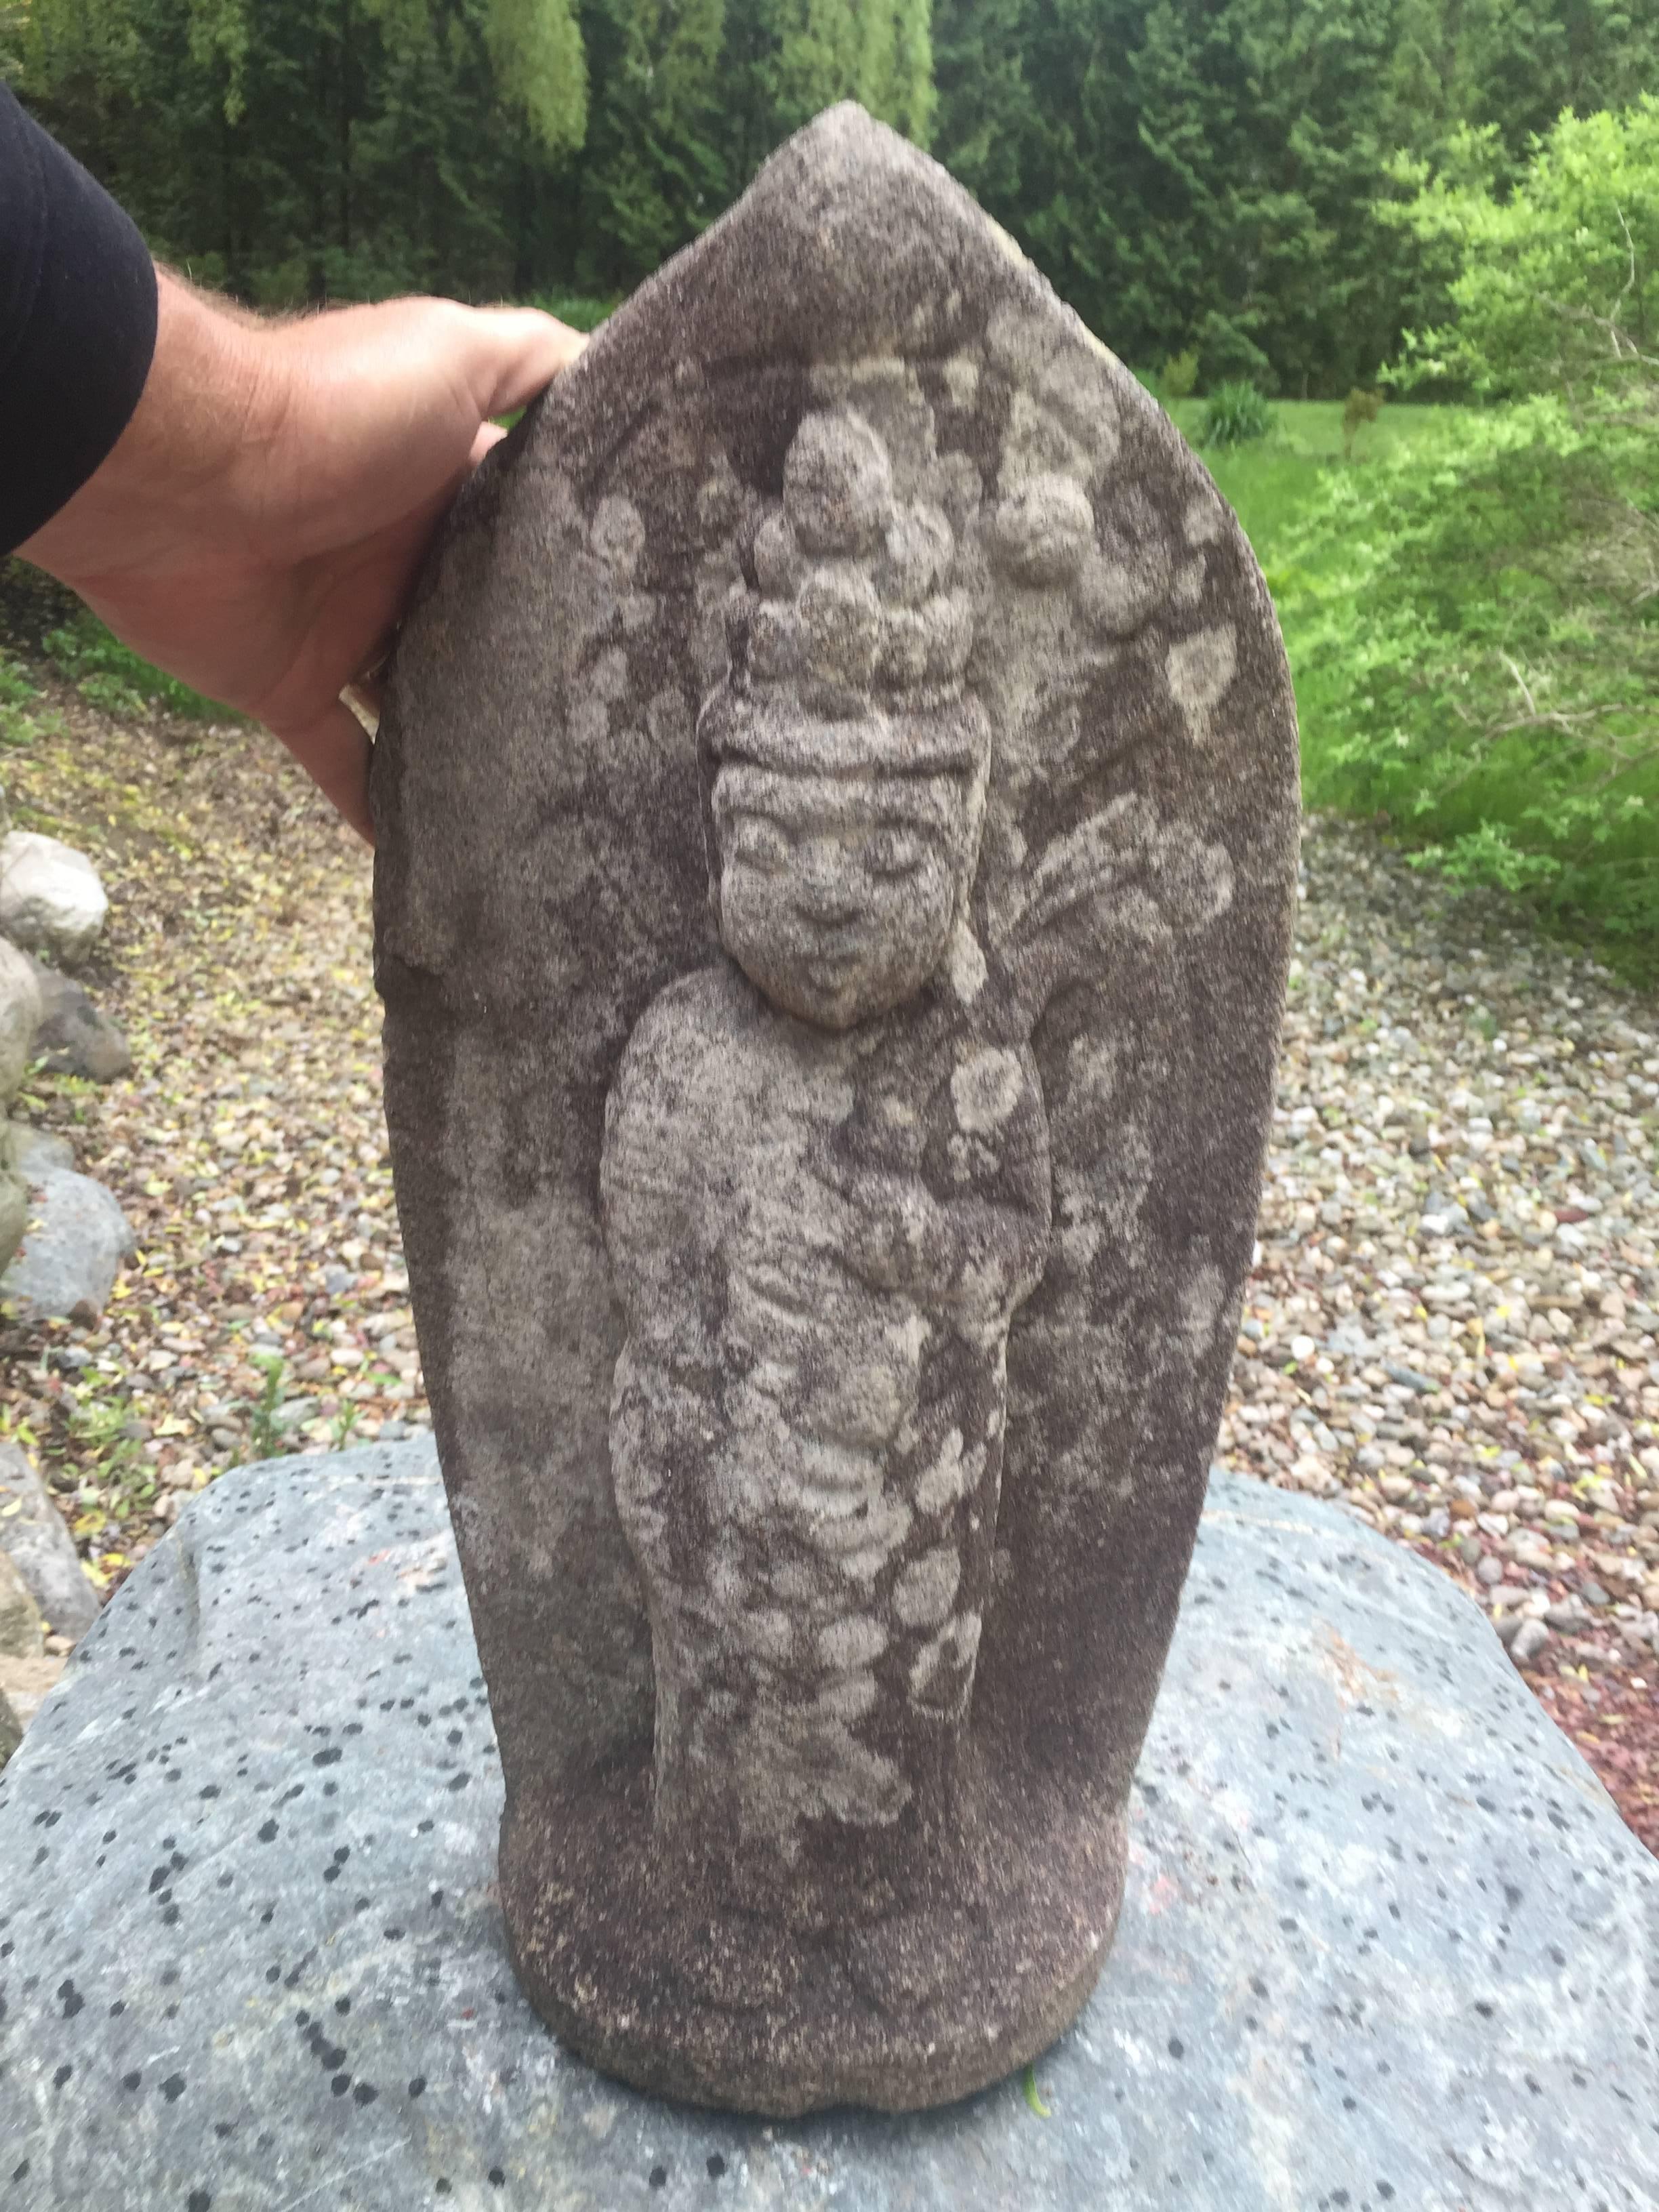 An early large and hard to find Japanese stone Kannon Guan Yin in the gassho mudra of adoration. It has been beautifully hand-sculpted from a grey-hued sedimentary stone with original lichen from great age and residing in a Kyoto garden for decades.